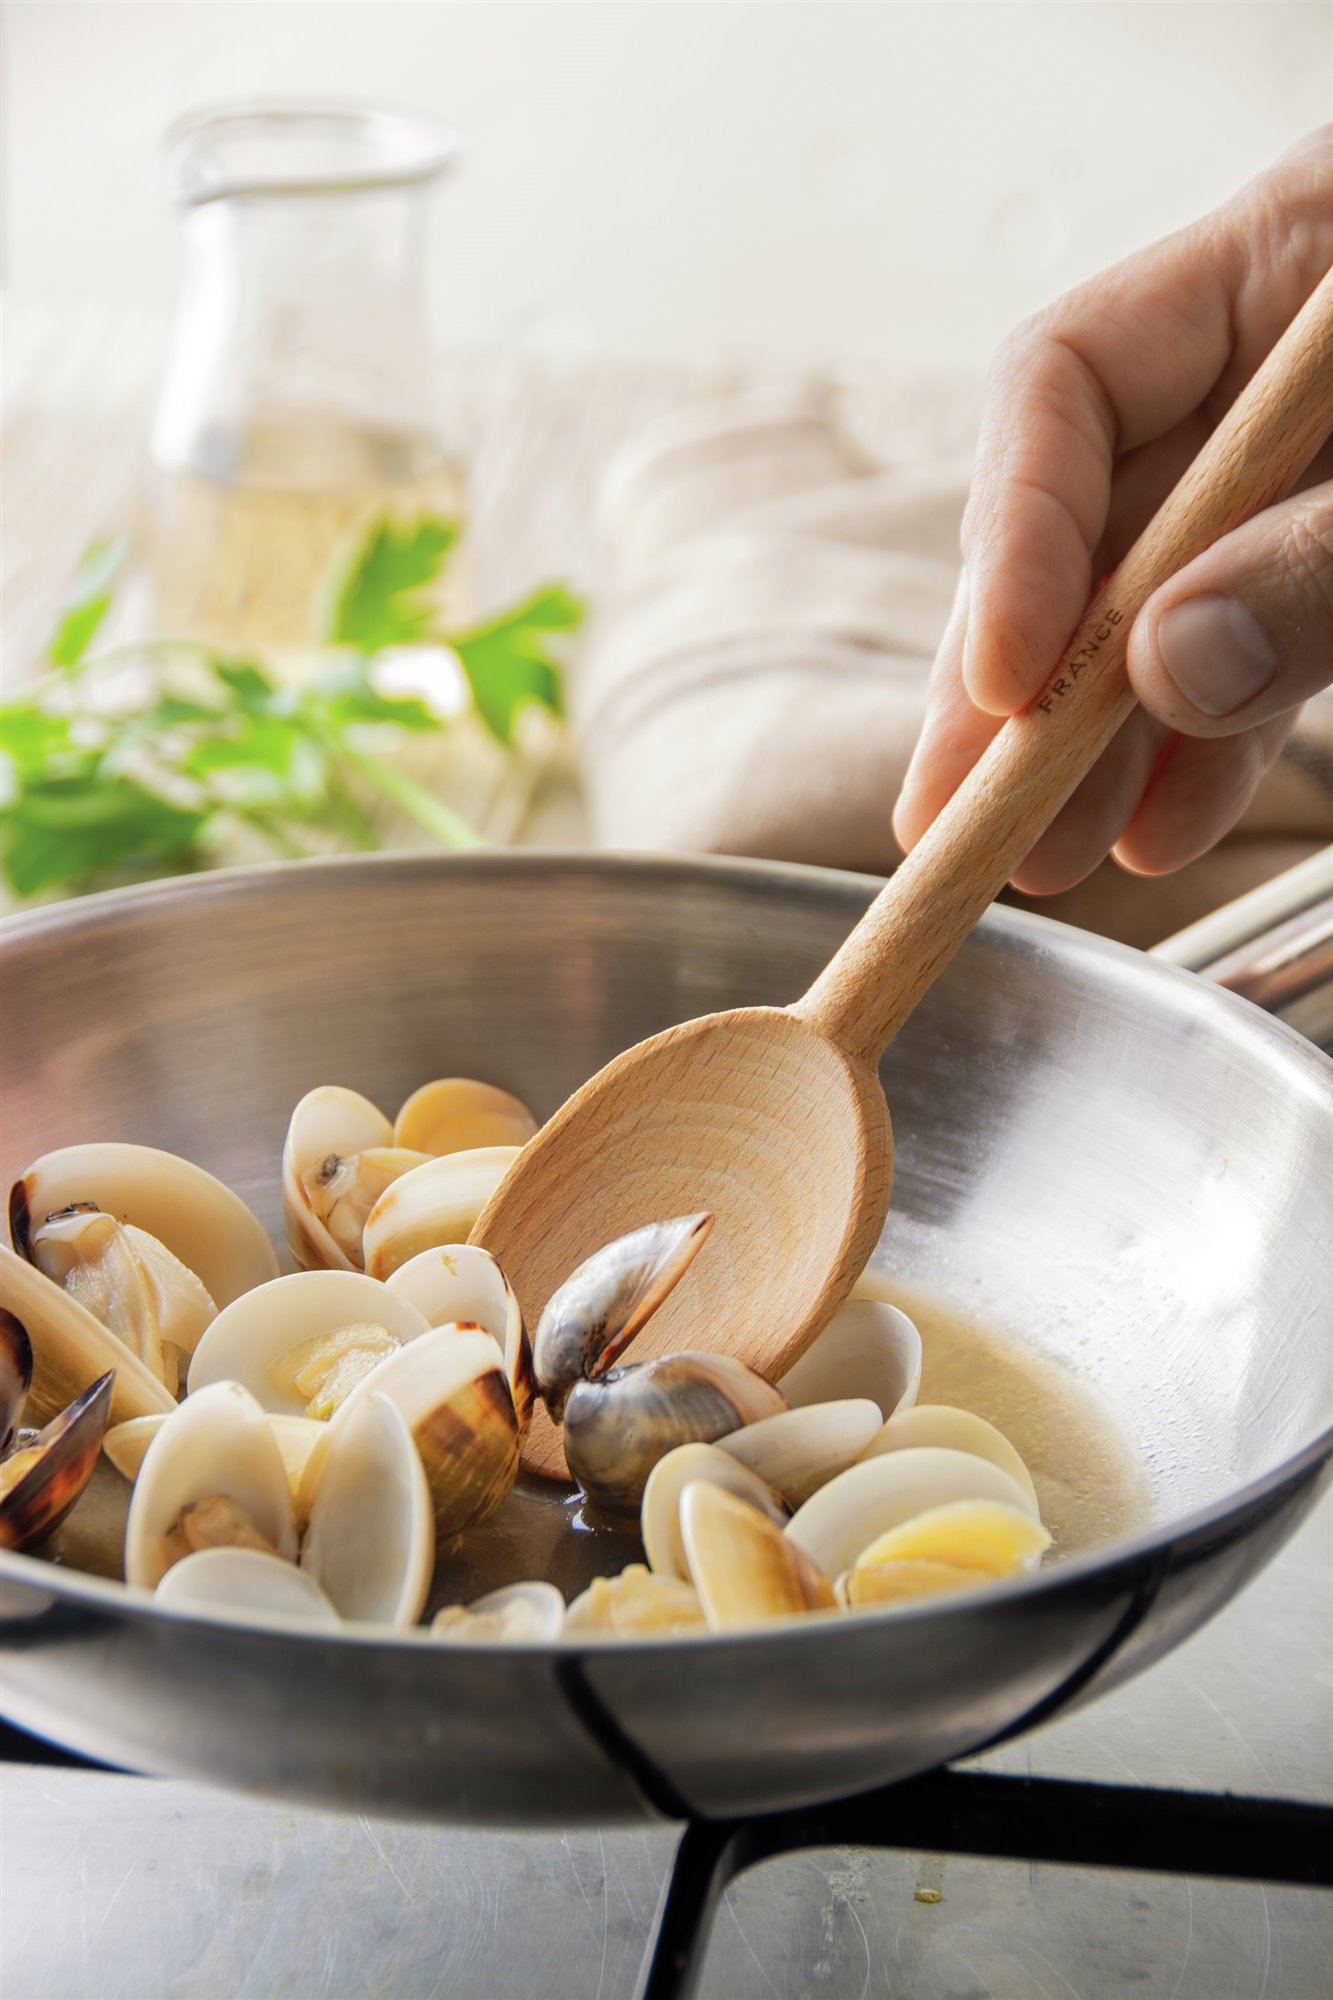 2. Cook the clams